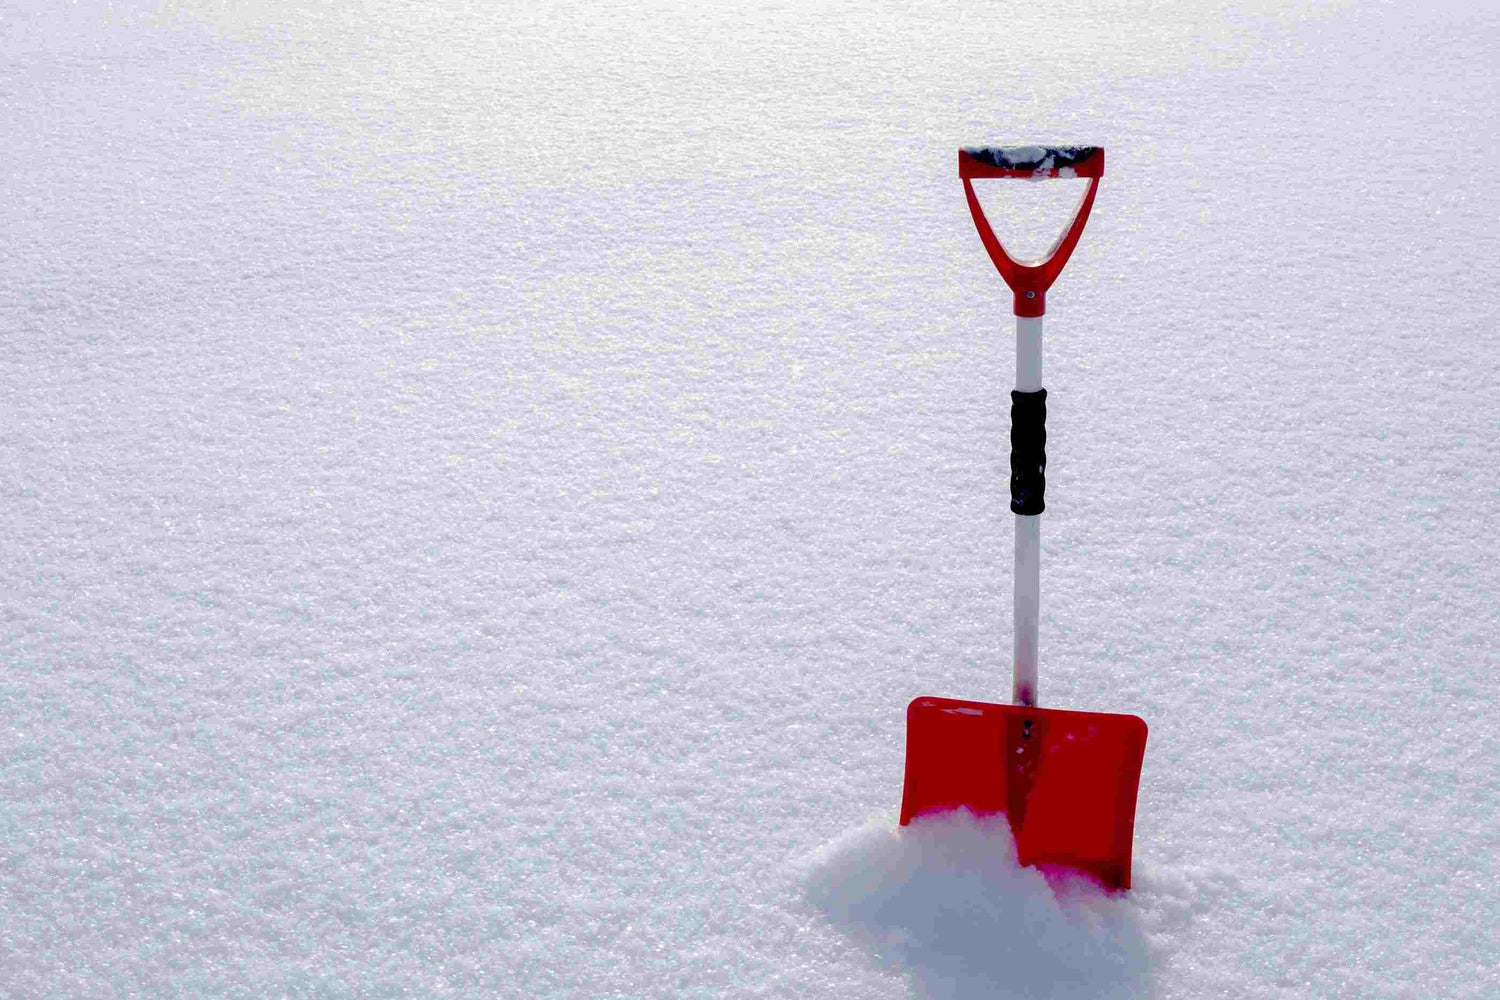 Comprehensive Comparison of Your Snow Removal Options